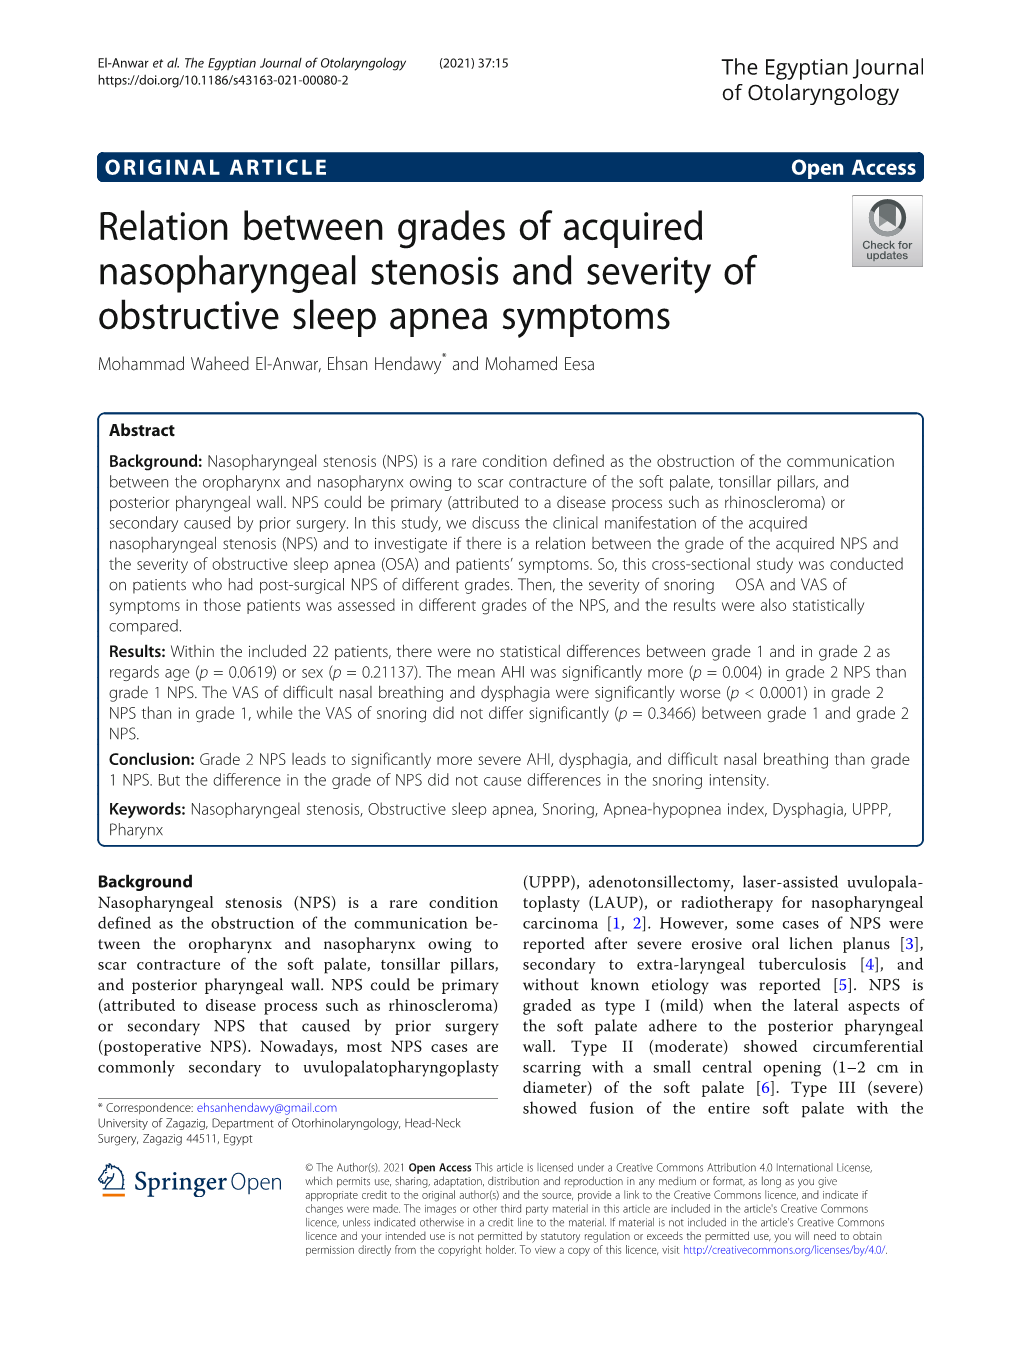 Relation Between Grades of Acquired Nasopharyngeal Stenosis and Severity of Obstructive Sleep Apnea Symptoms Mohammad Waheed El-Anwar, Ehsan Hendawy* and Mohamed Eesa